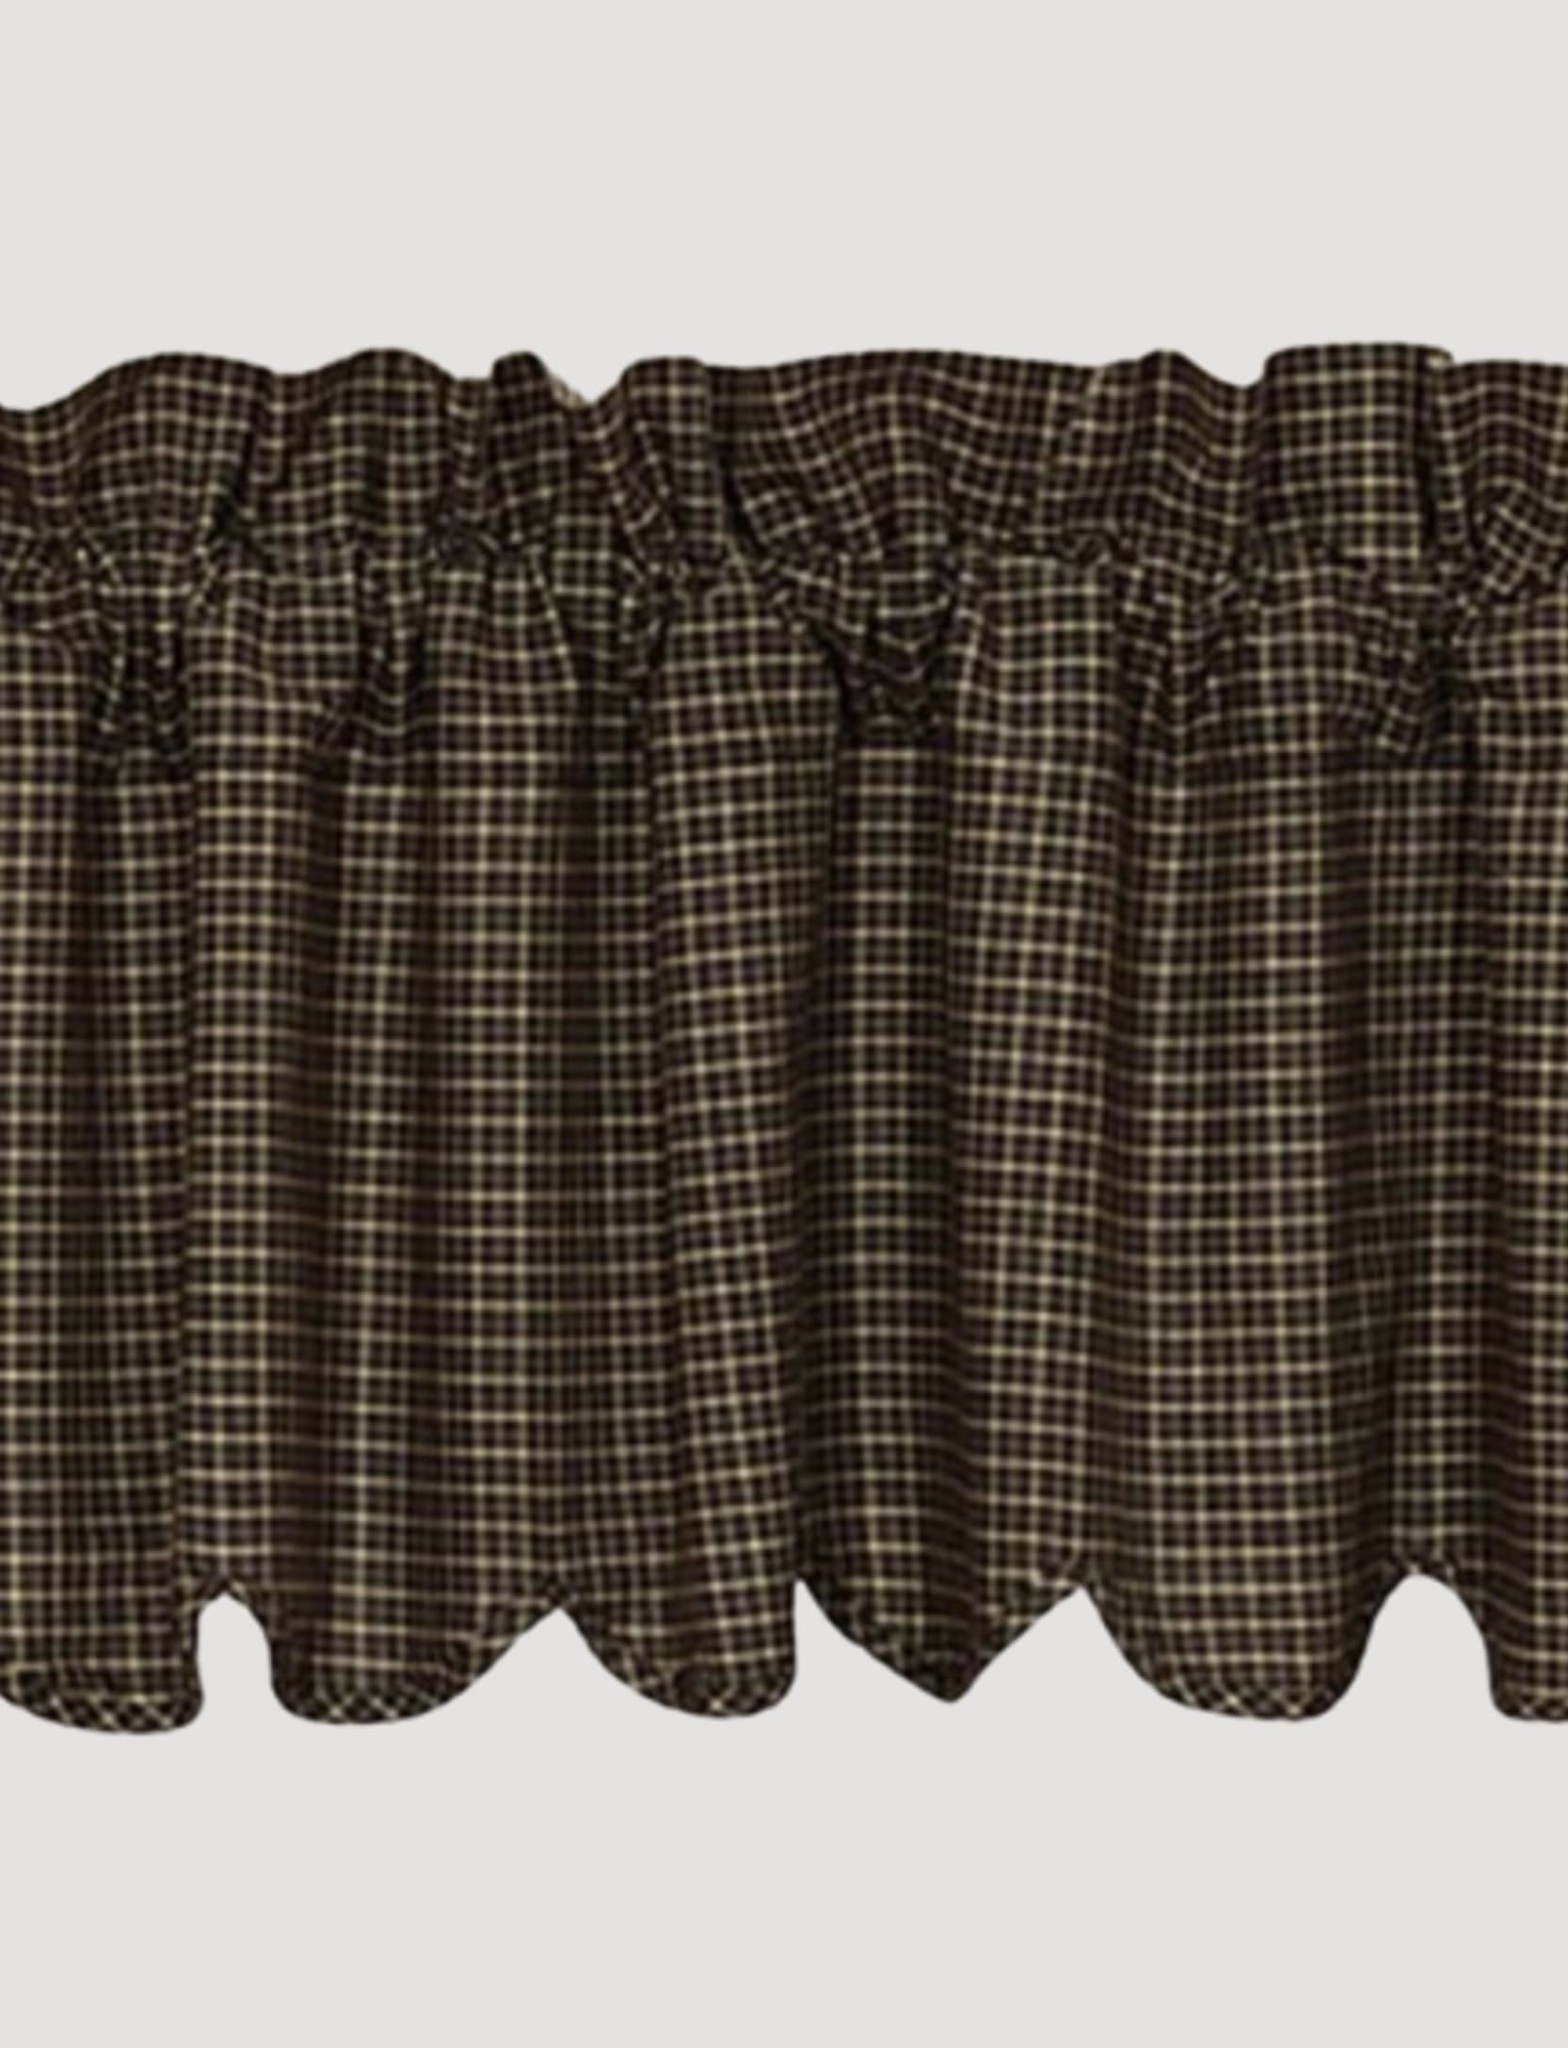 VHC Brands Kettle Grove Plaid Scalloped Valance 16" x 72" Brand: VHC Brands